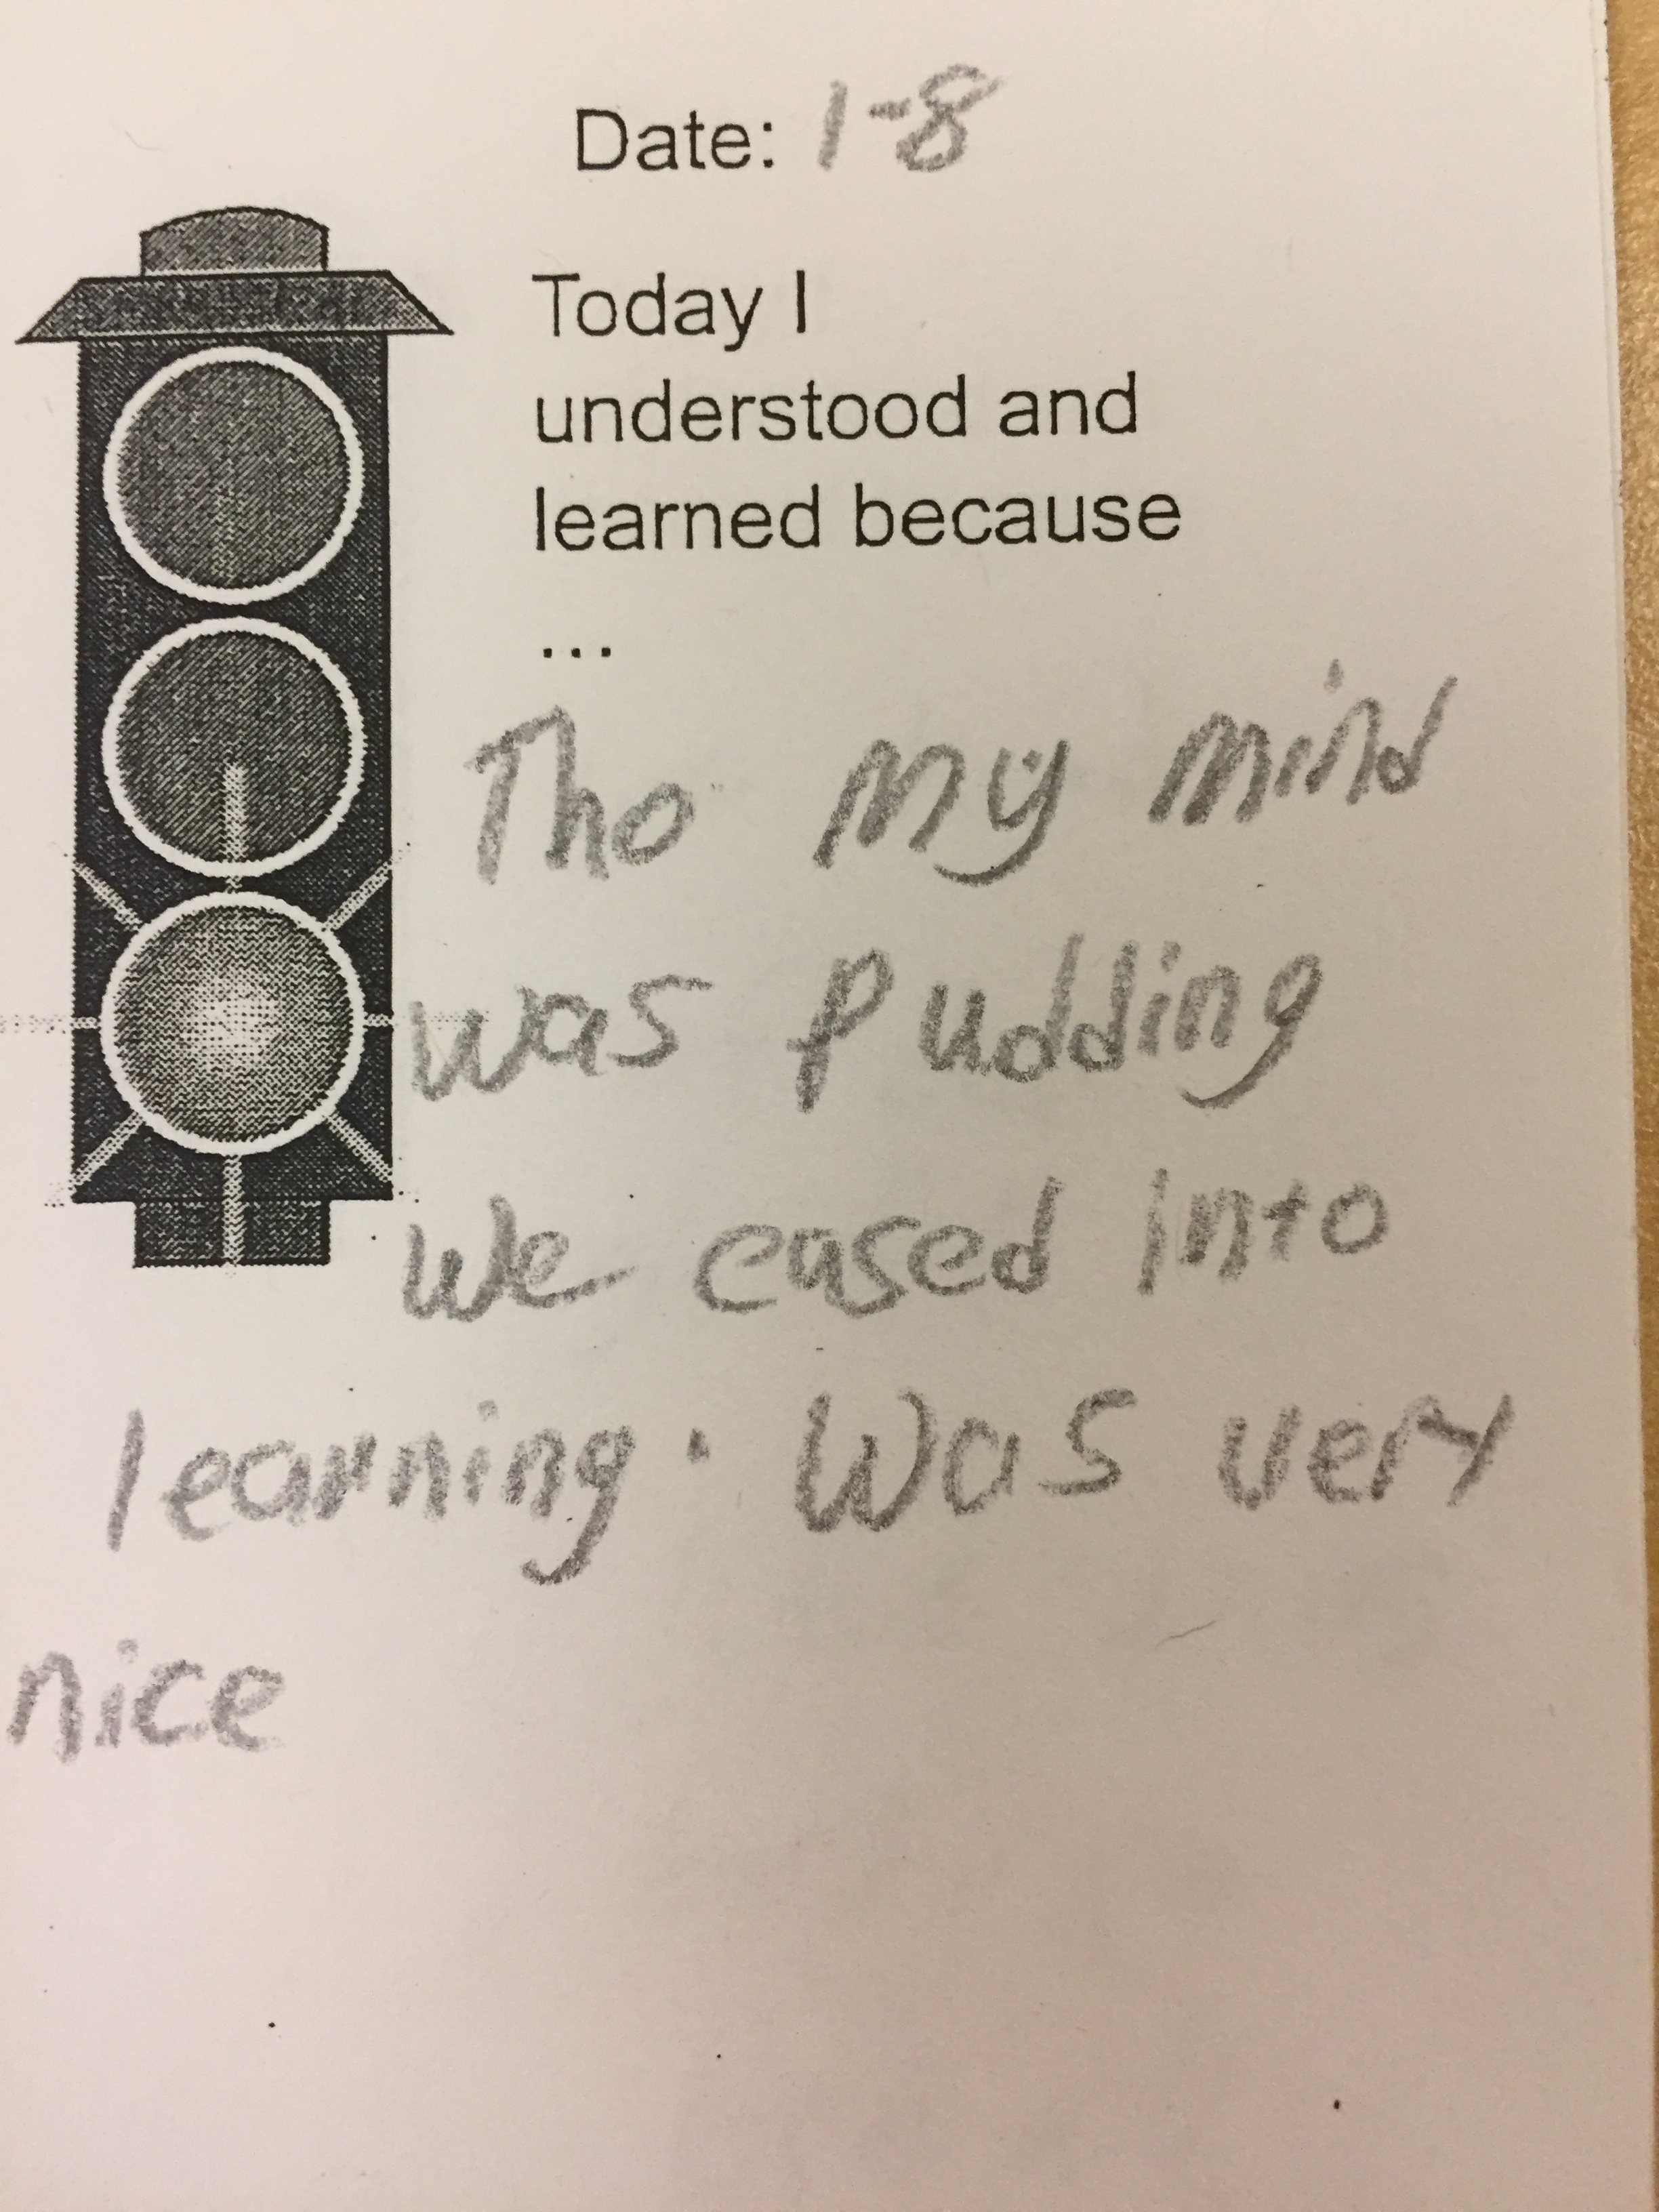 Student writing "Tho my mind was pudding we eased into learning. Was very nice"